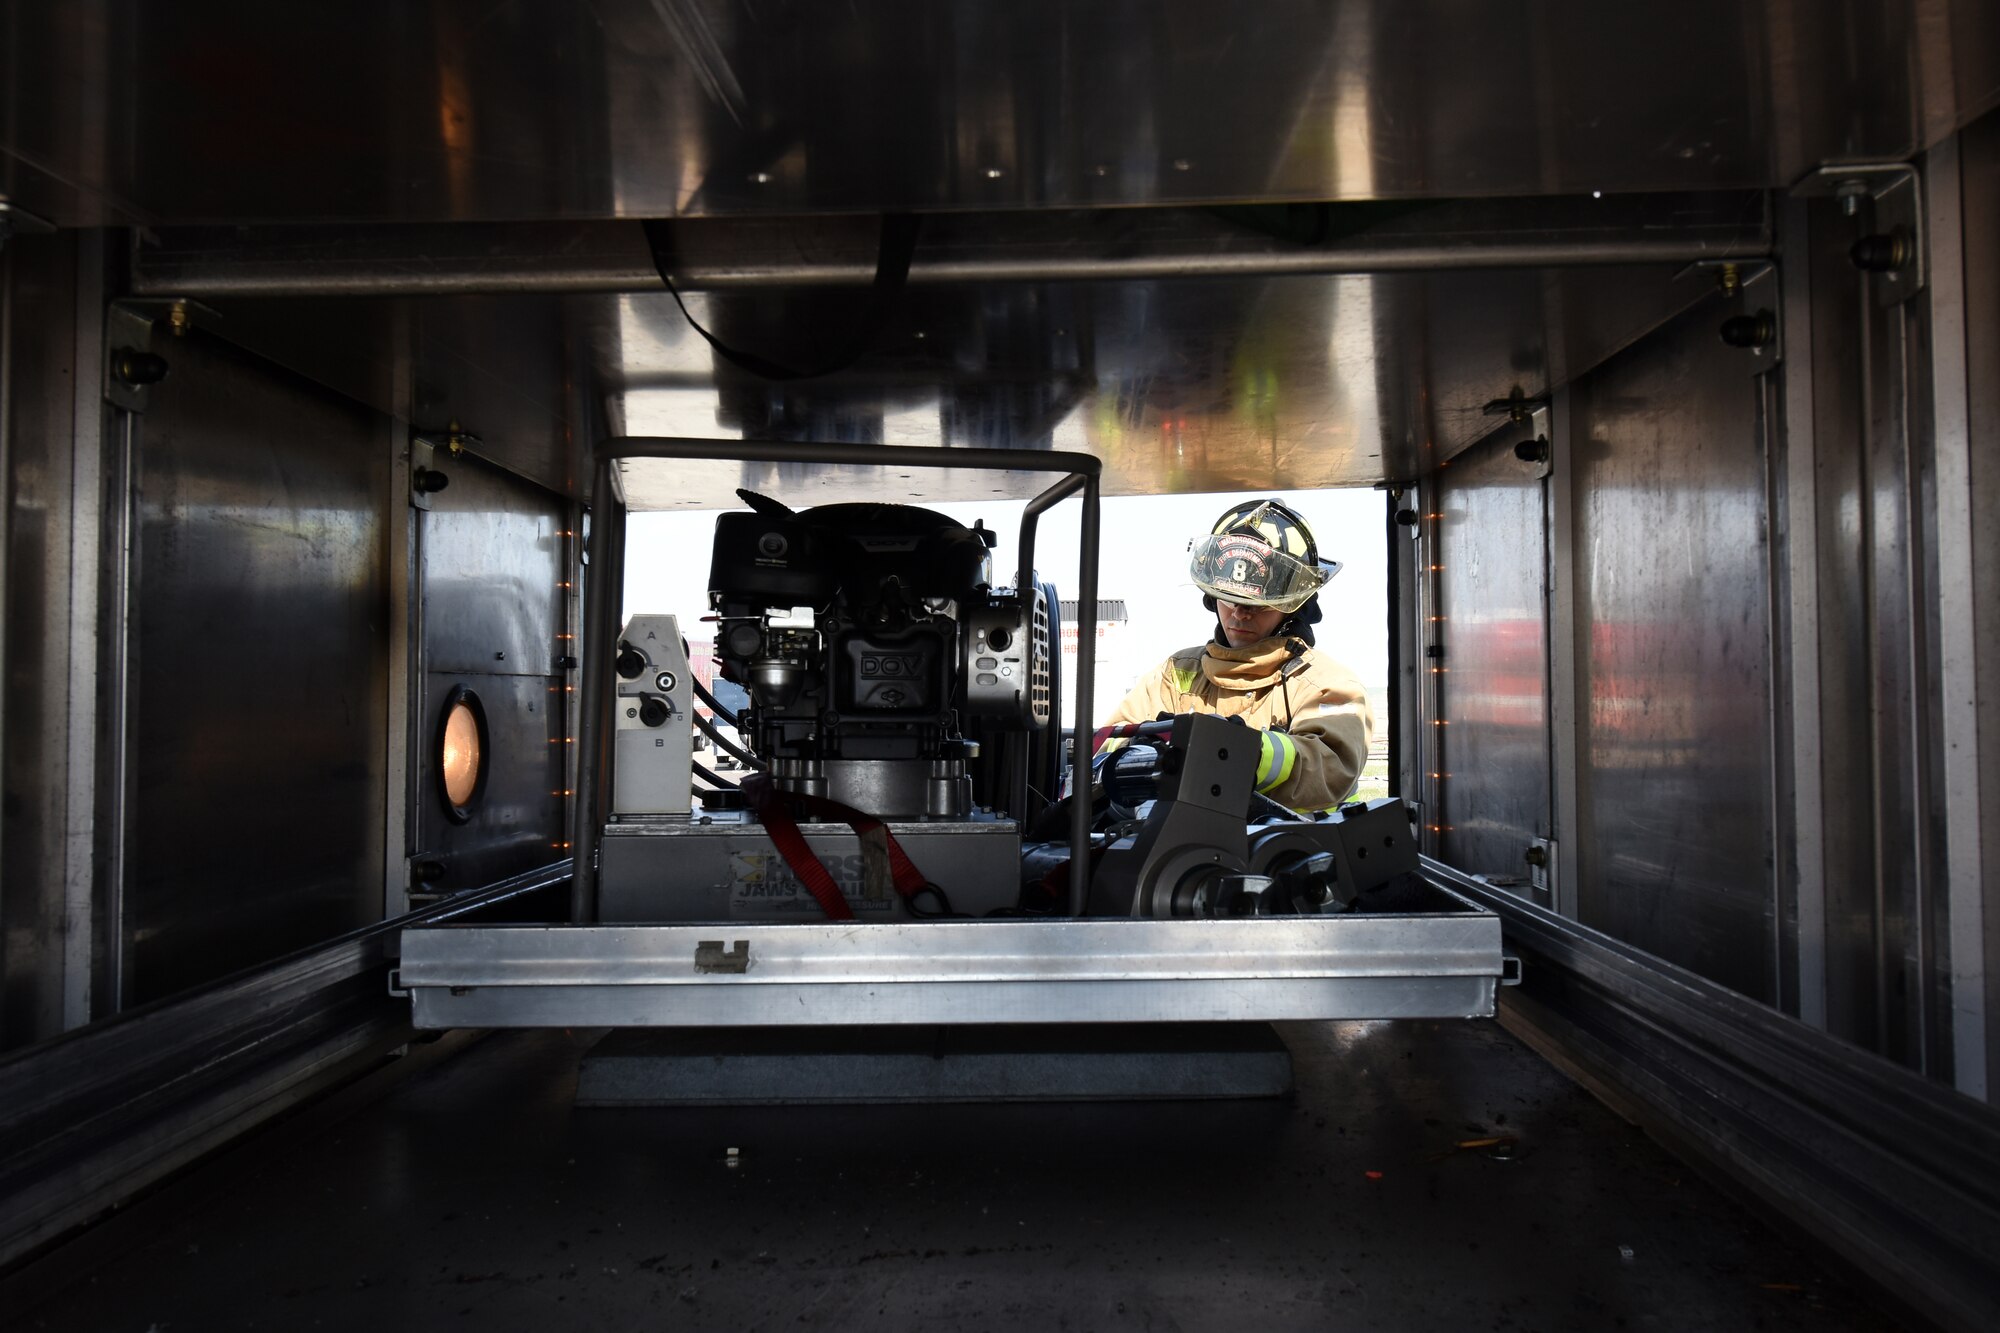 Senior Airman Hector Guemarezcolon, 341st Civil Engineer Squadron firefighter, prepares to accomplish morning checkout on rescue-truck equipment April 22, 2015, at Malmstrom Air Force Base, Mont. Crews at the Malmstrom Fire Department operate on 24-hour shifts and must be in full gear and out the door within 60 seconds from the moment an alarm sounds. (U.S. Air Force photo/Chris Willis)